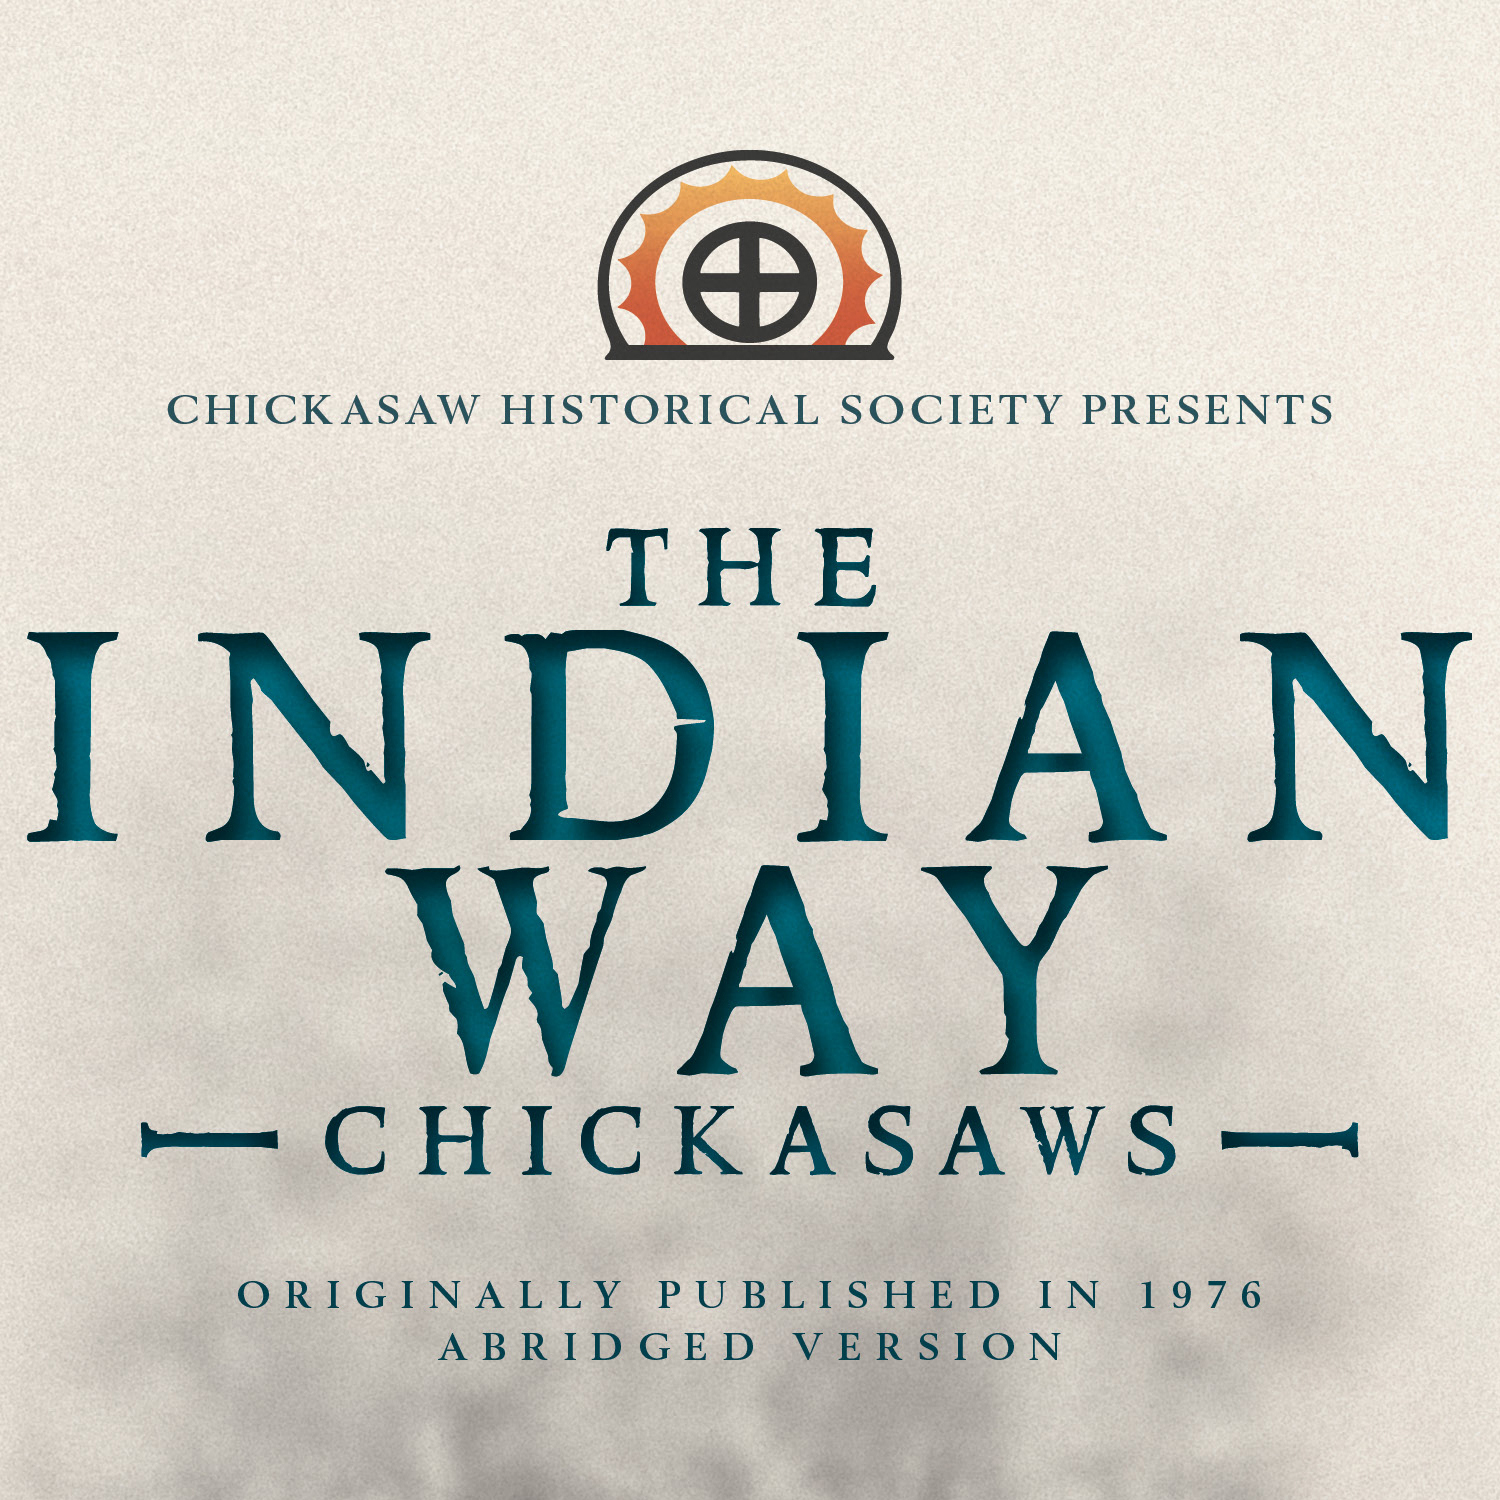 The Indian Way: Chickasaws